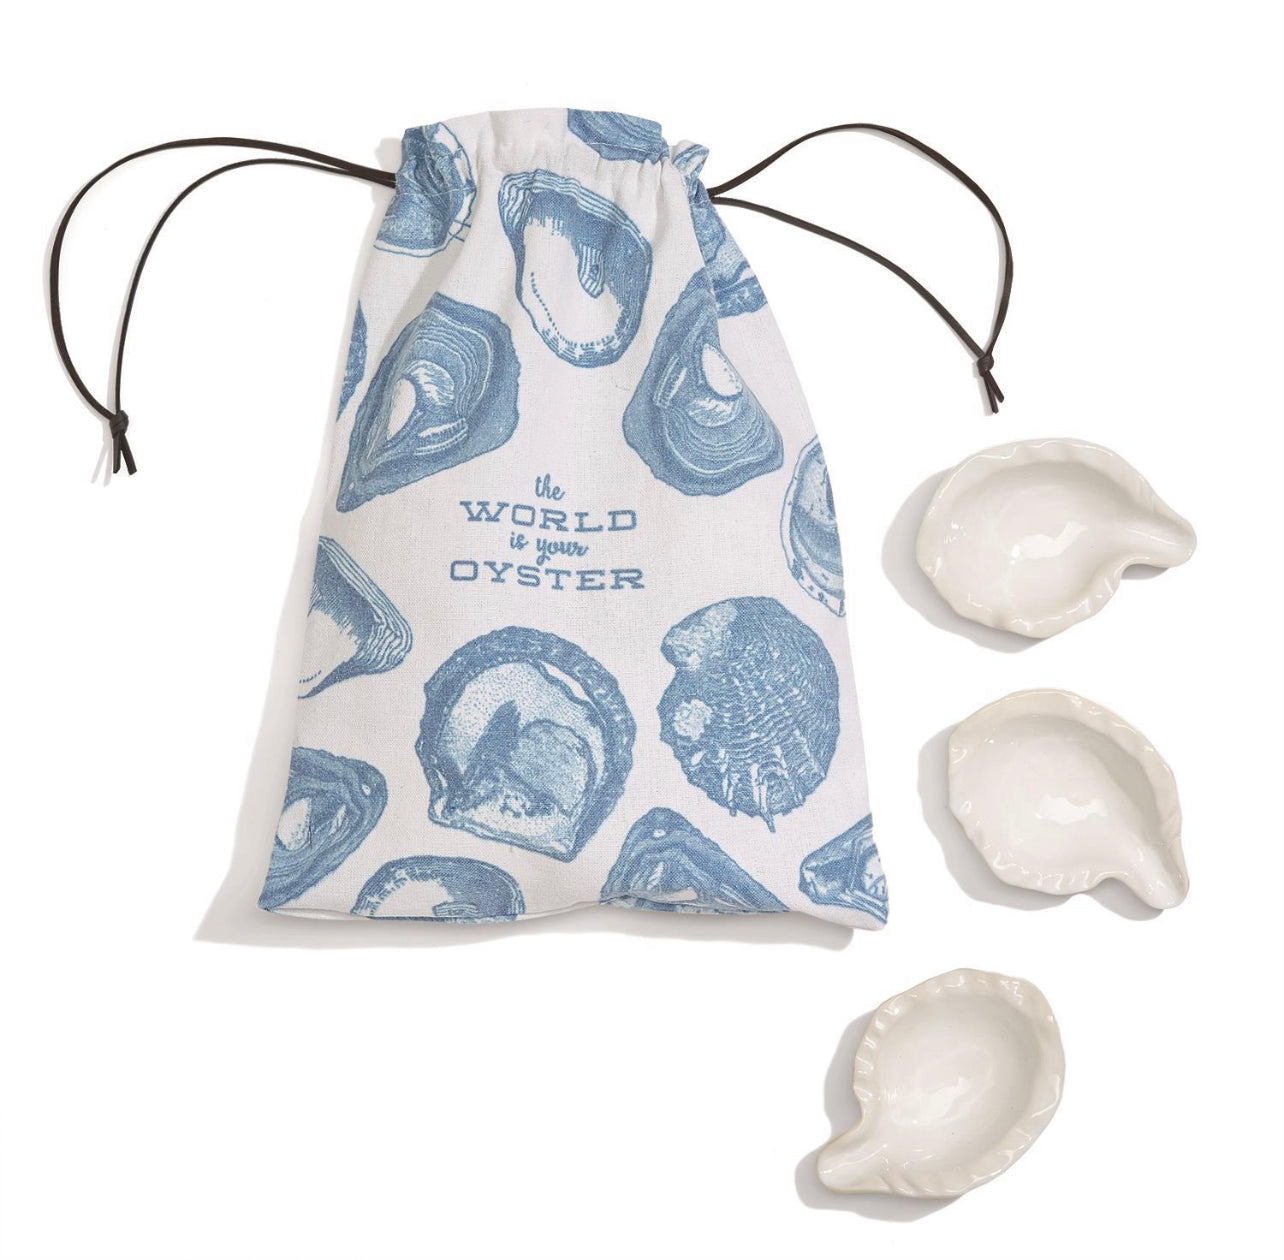 Set of 12 Oyster Bakers